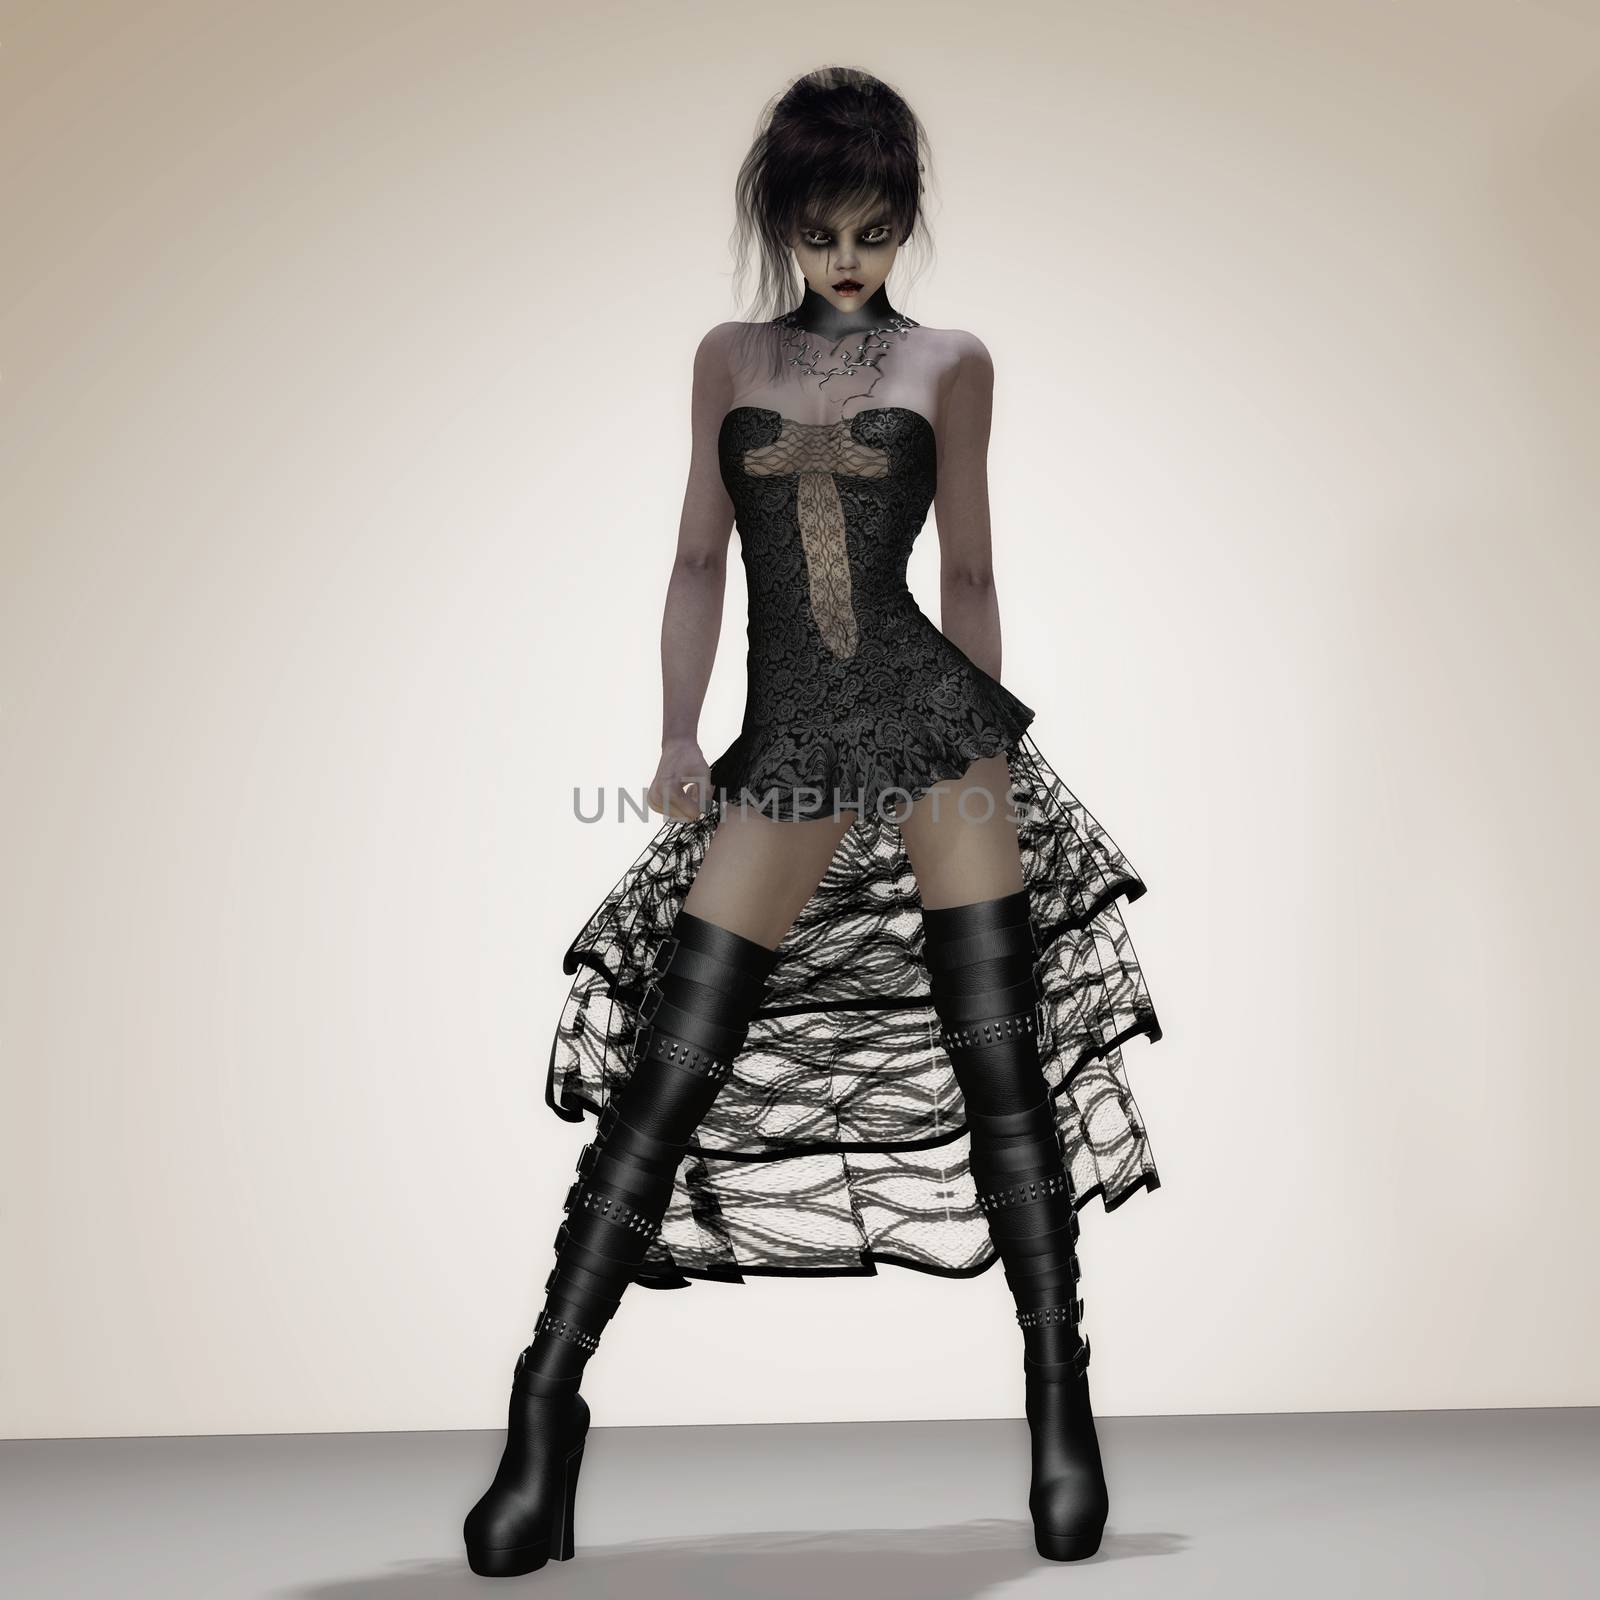 3D Illustration; 3D Rendering of a gothic Female